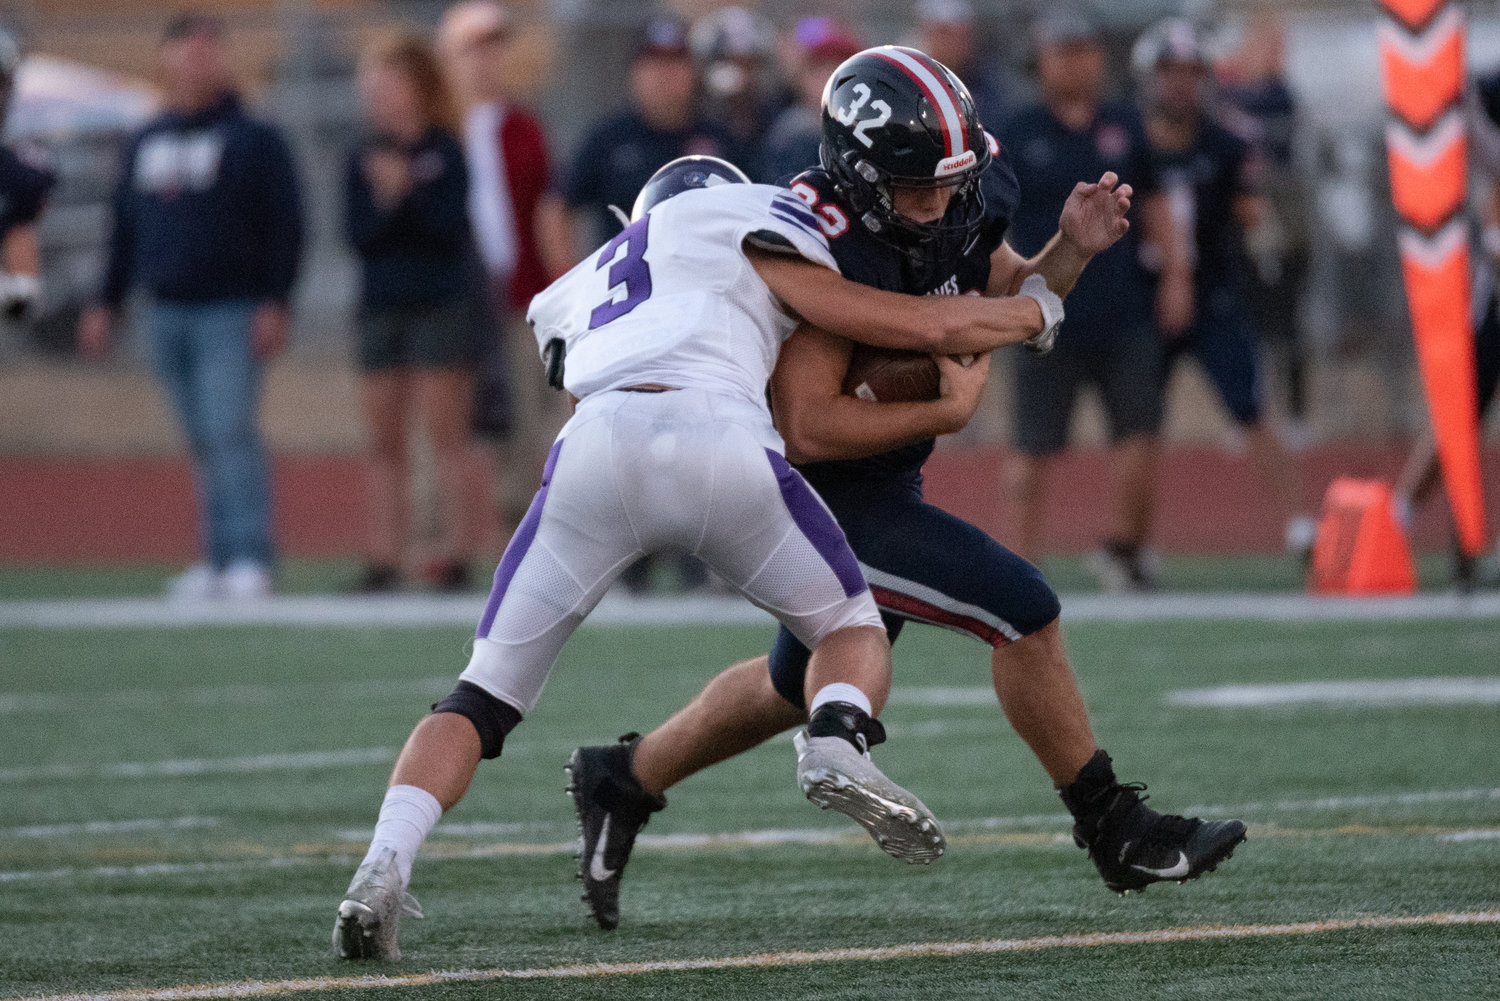 Johnnie Stallings tries to run through a tackle in the first half of Black Hills' 15-0 win over North Thurston on Sept. 8 at South Sound Stadium.